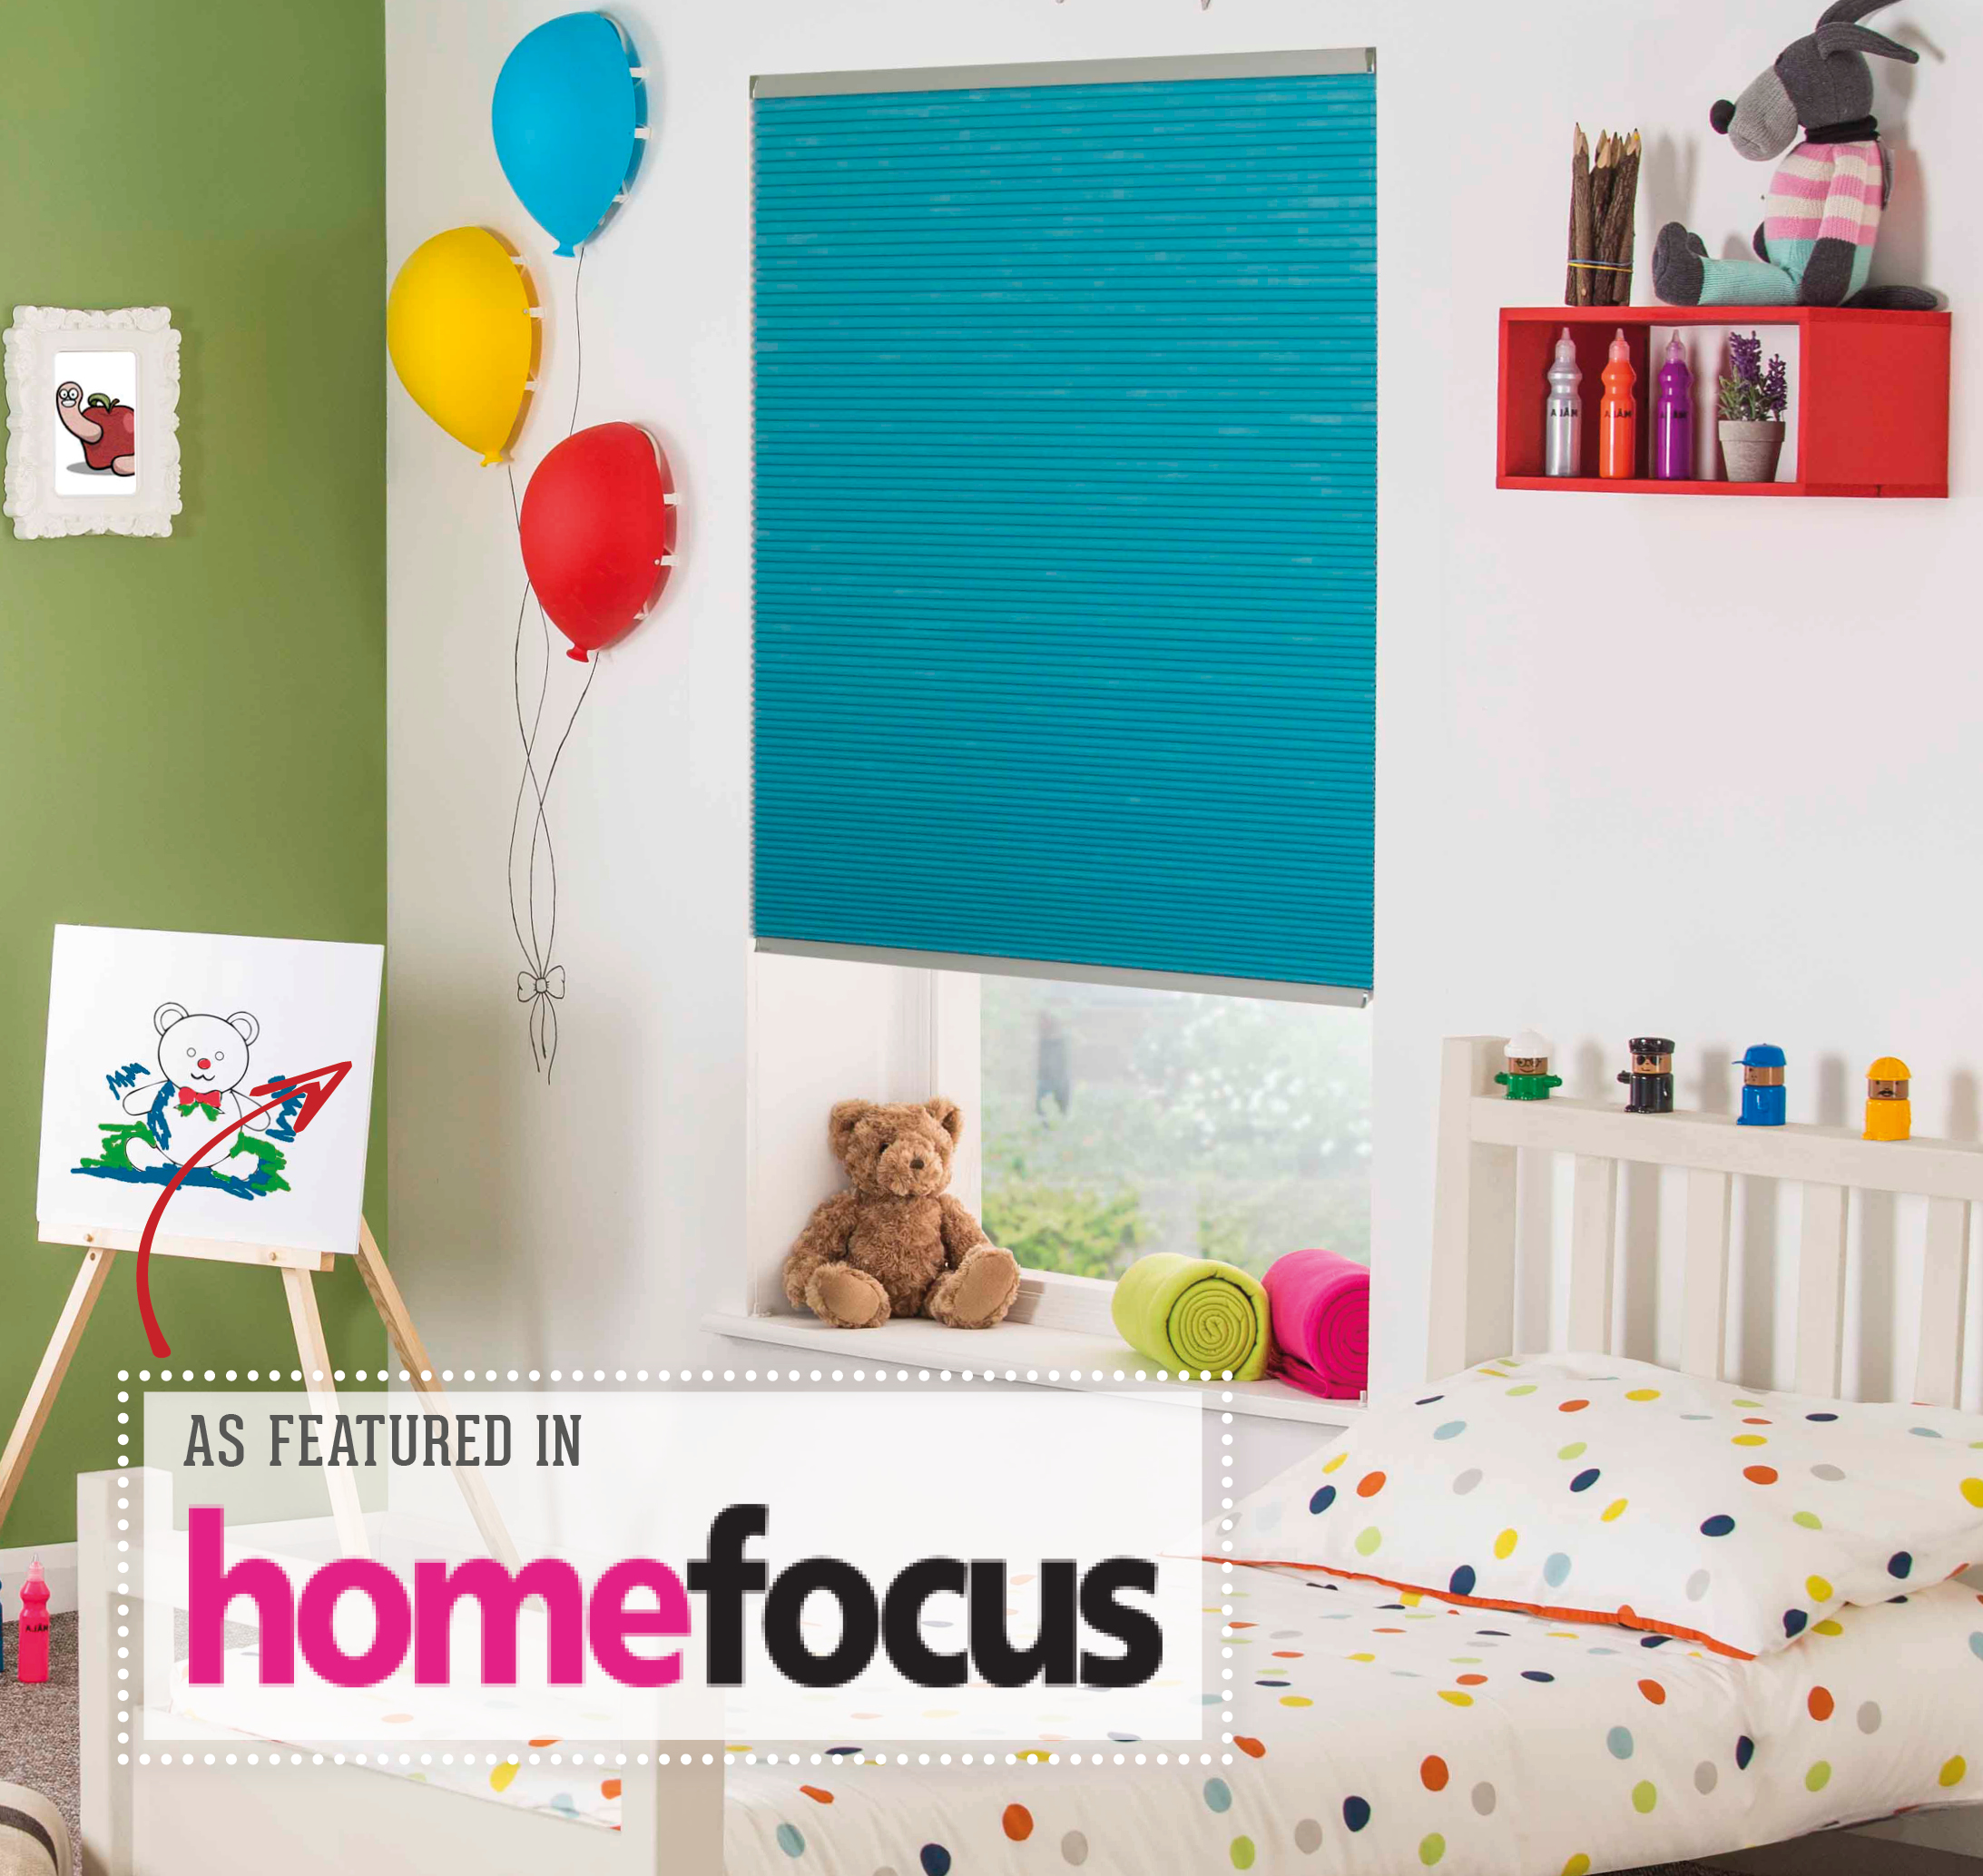 As Featured in Home Focus